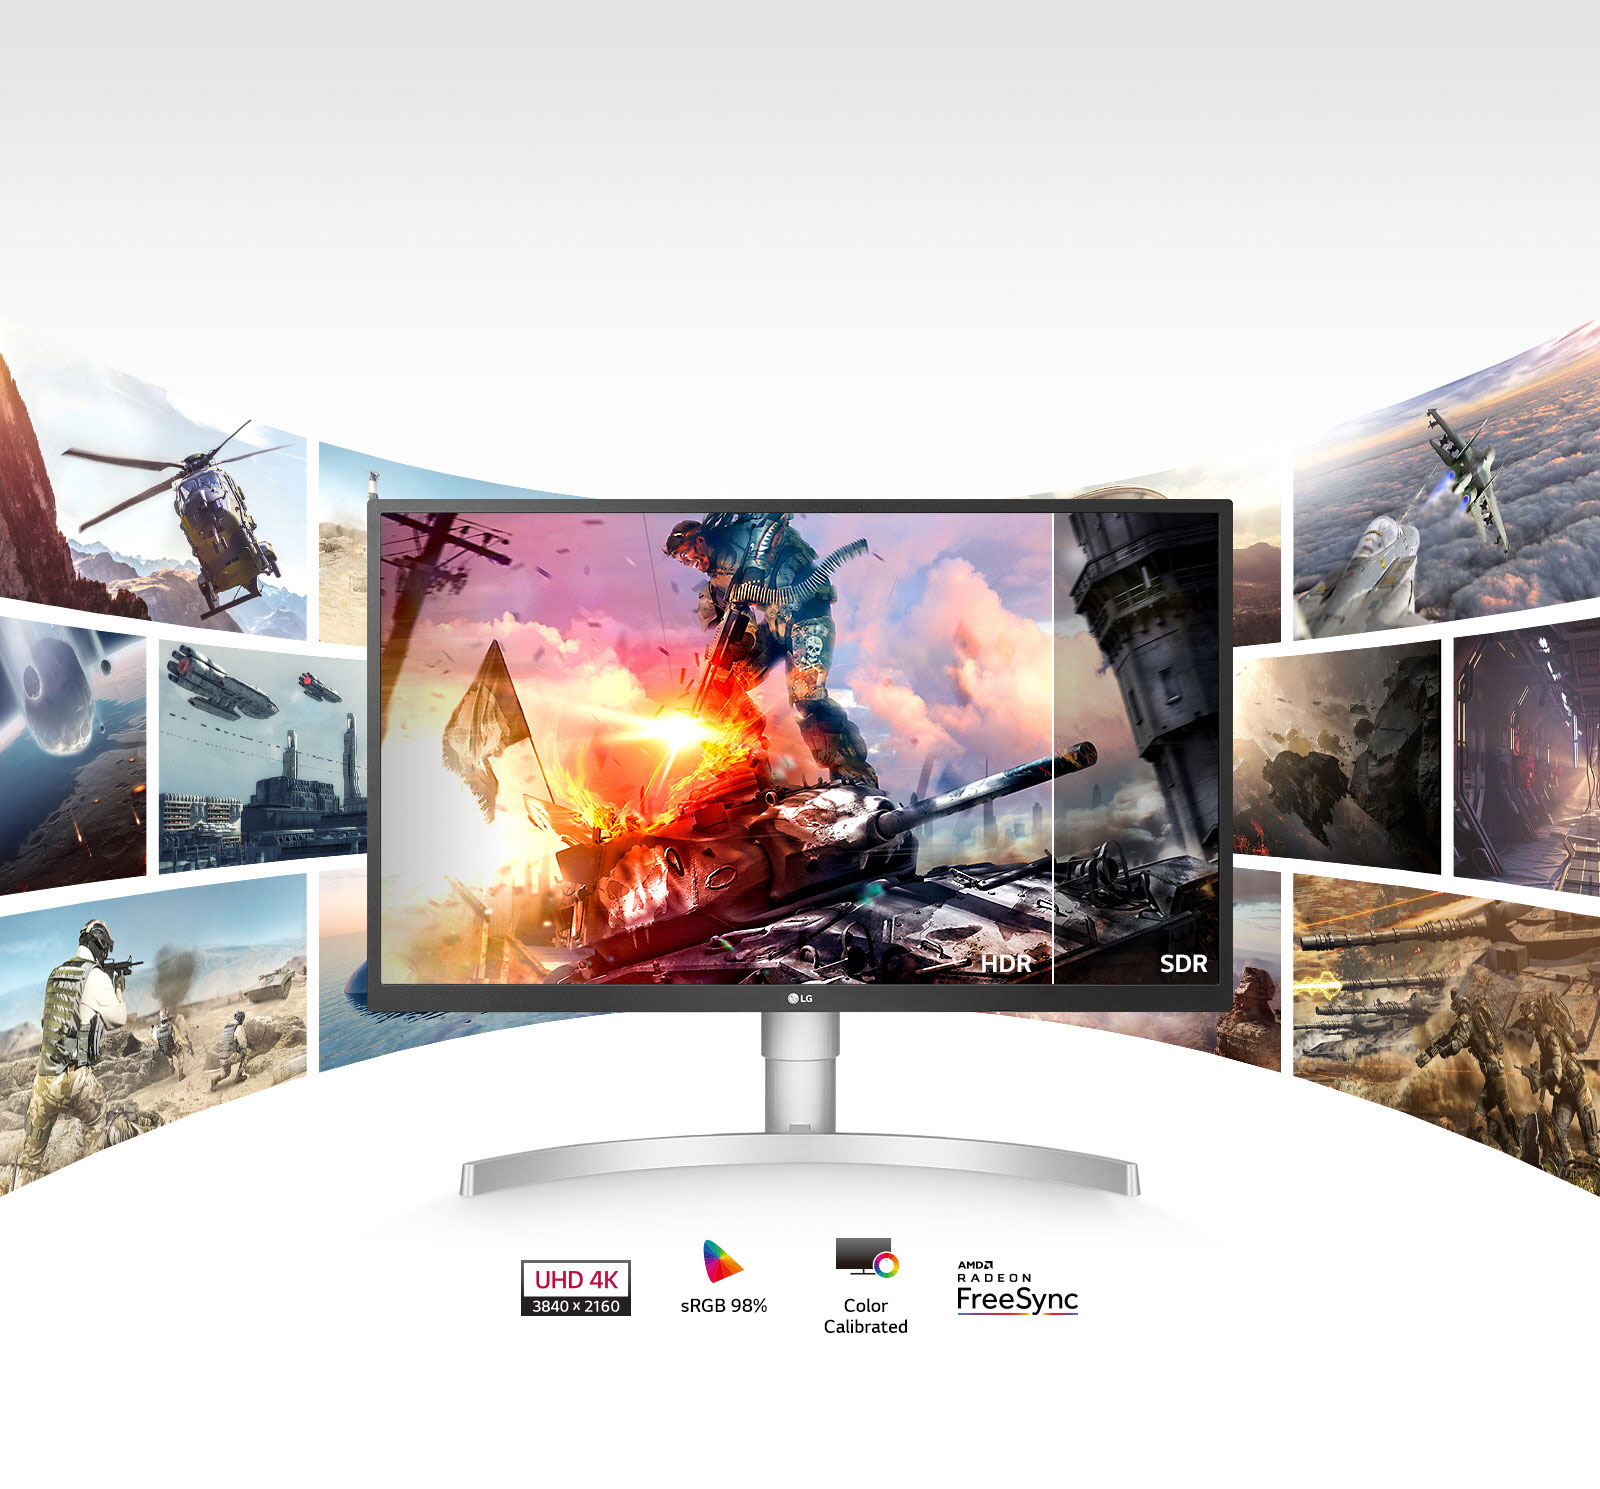 LG monitor display with video game graphics and multi-panel screens behind it.